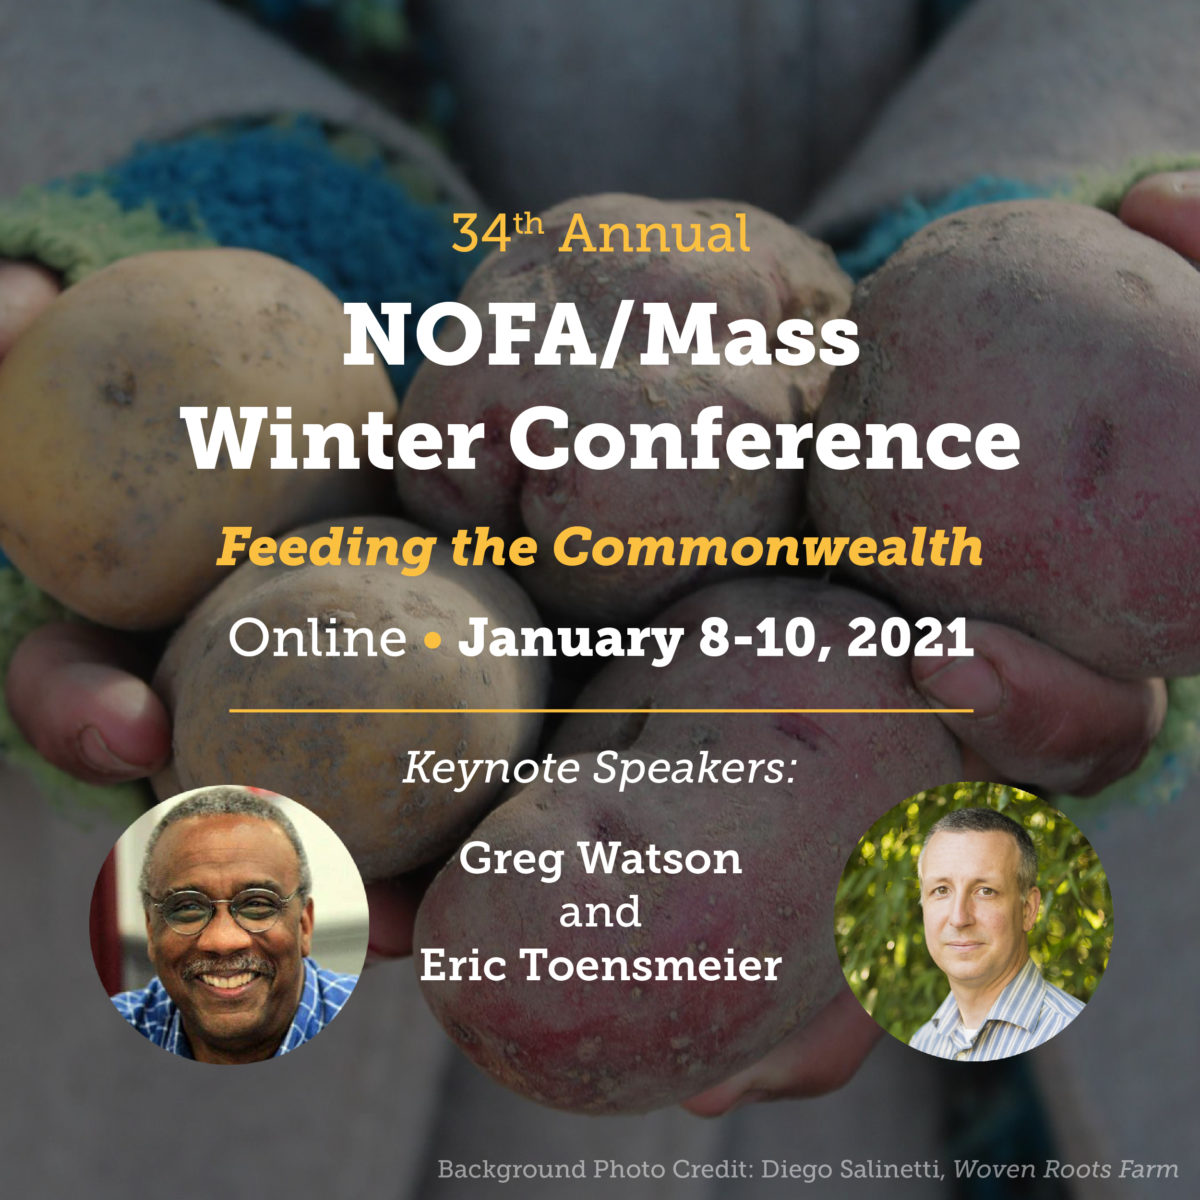 Nofa mass winter conference